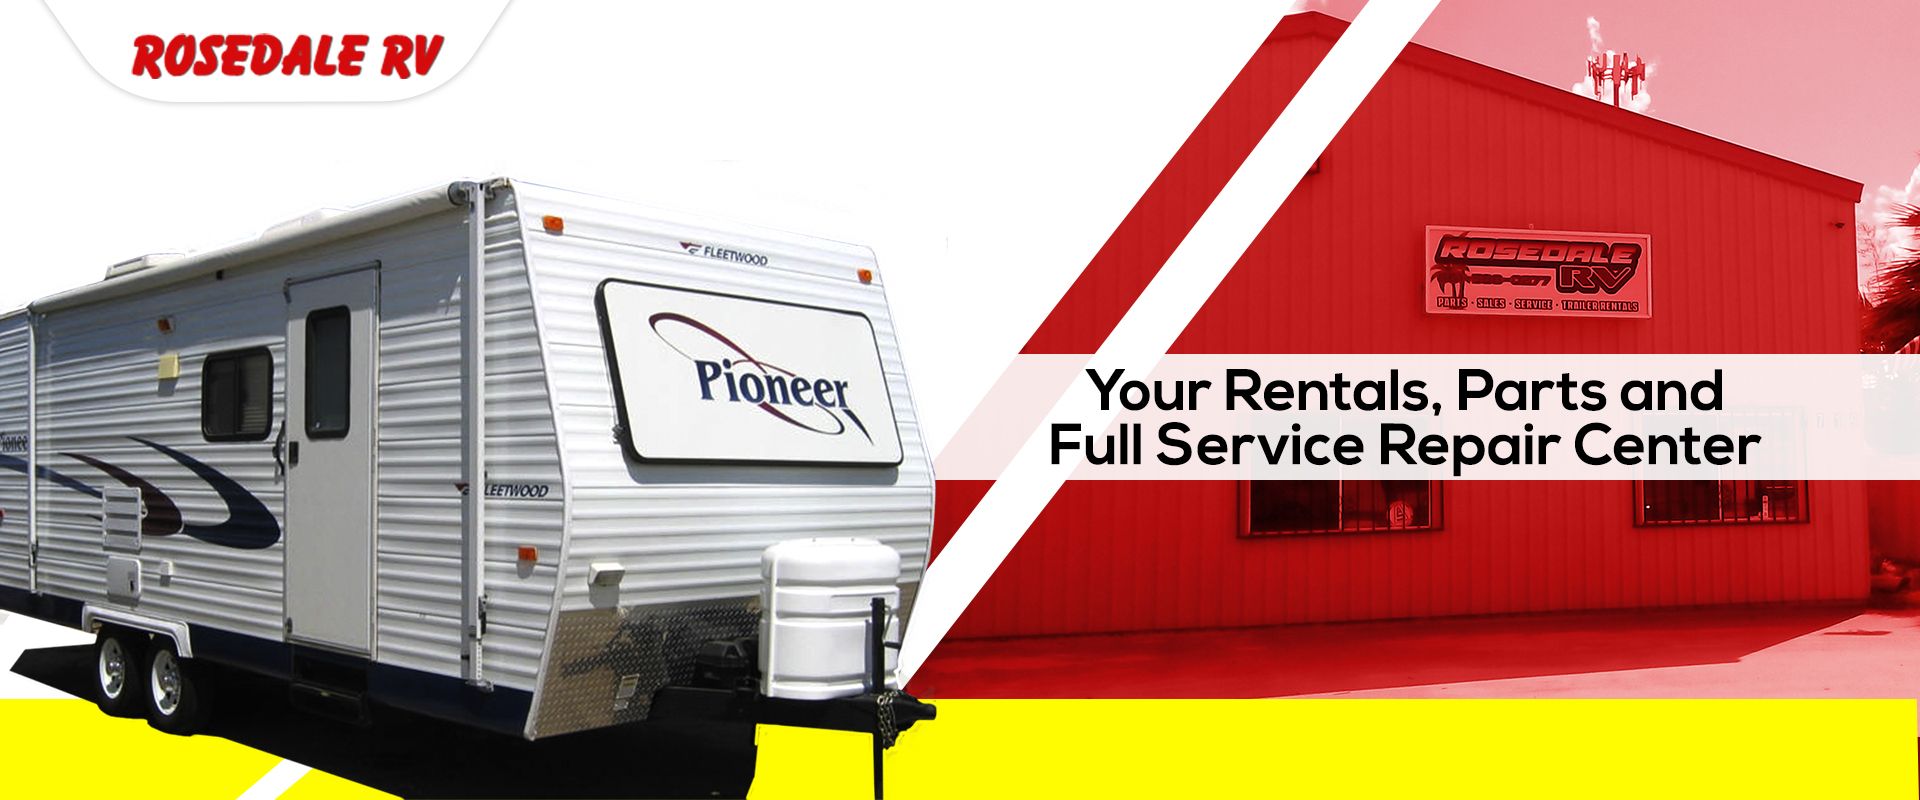 your rentals, parts and full service repair center